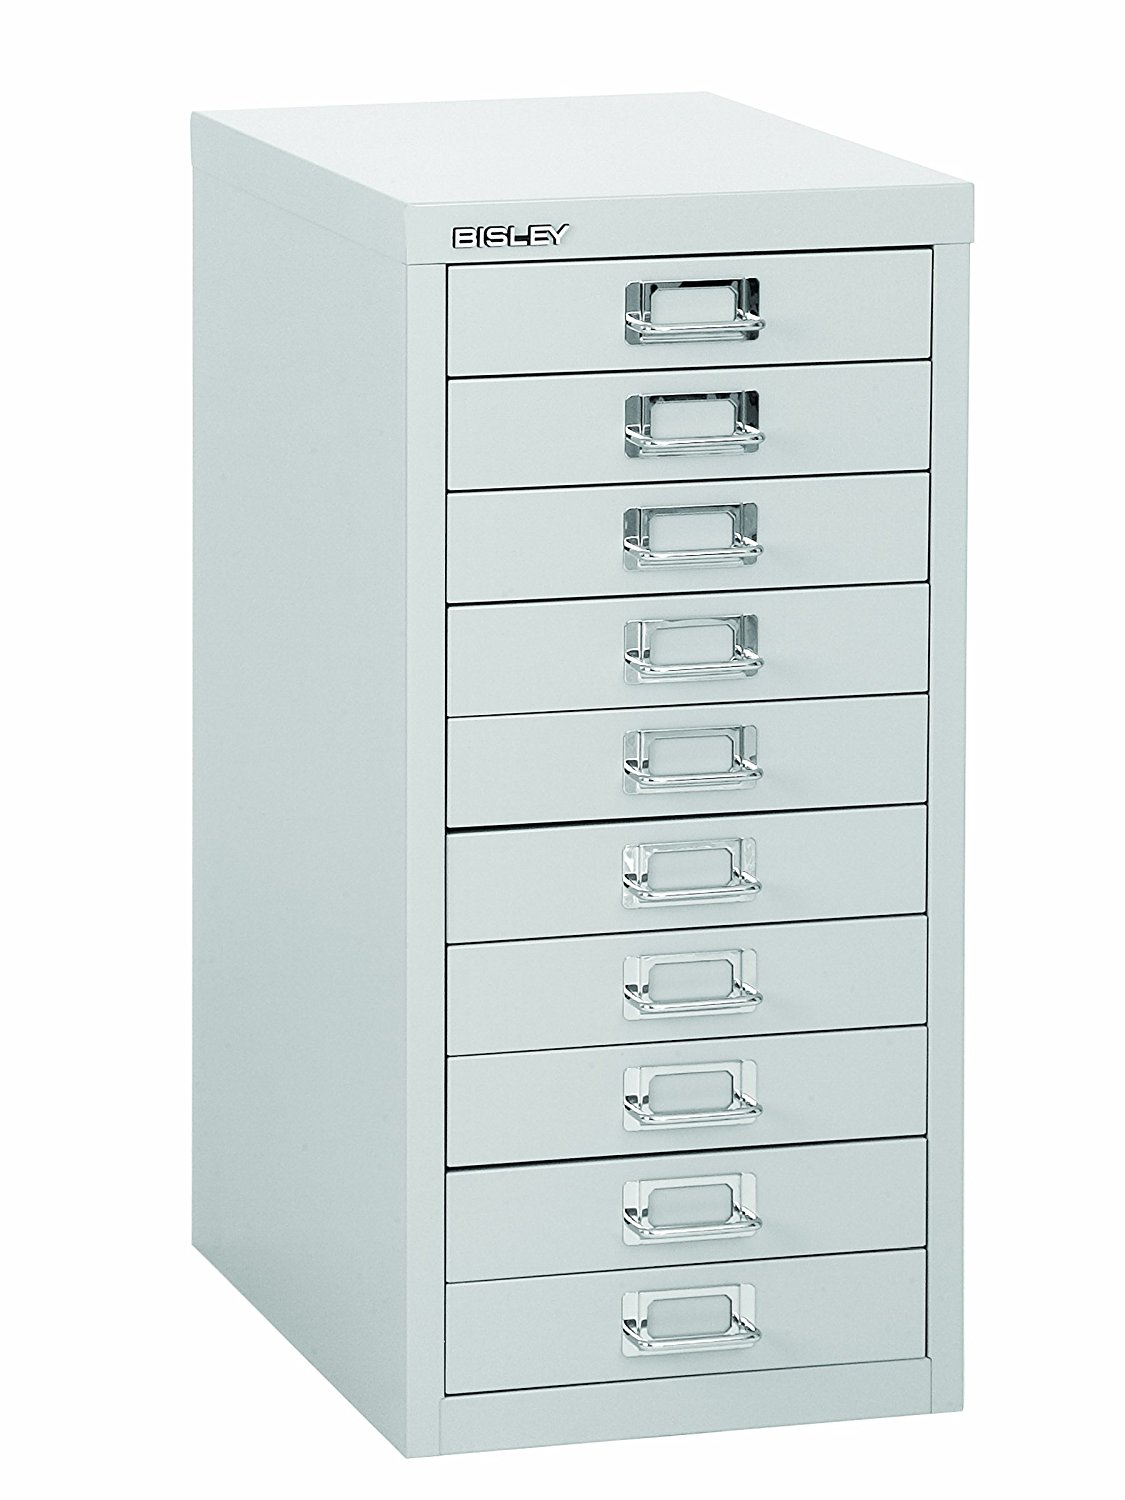 Bisley 10 Drawer A4 Cabinet Grey H2910nl 073 Acs Business